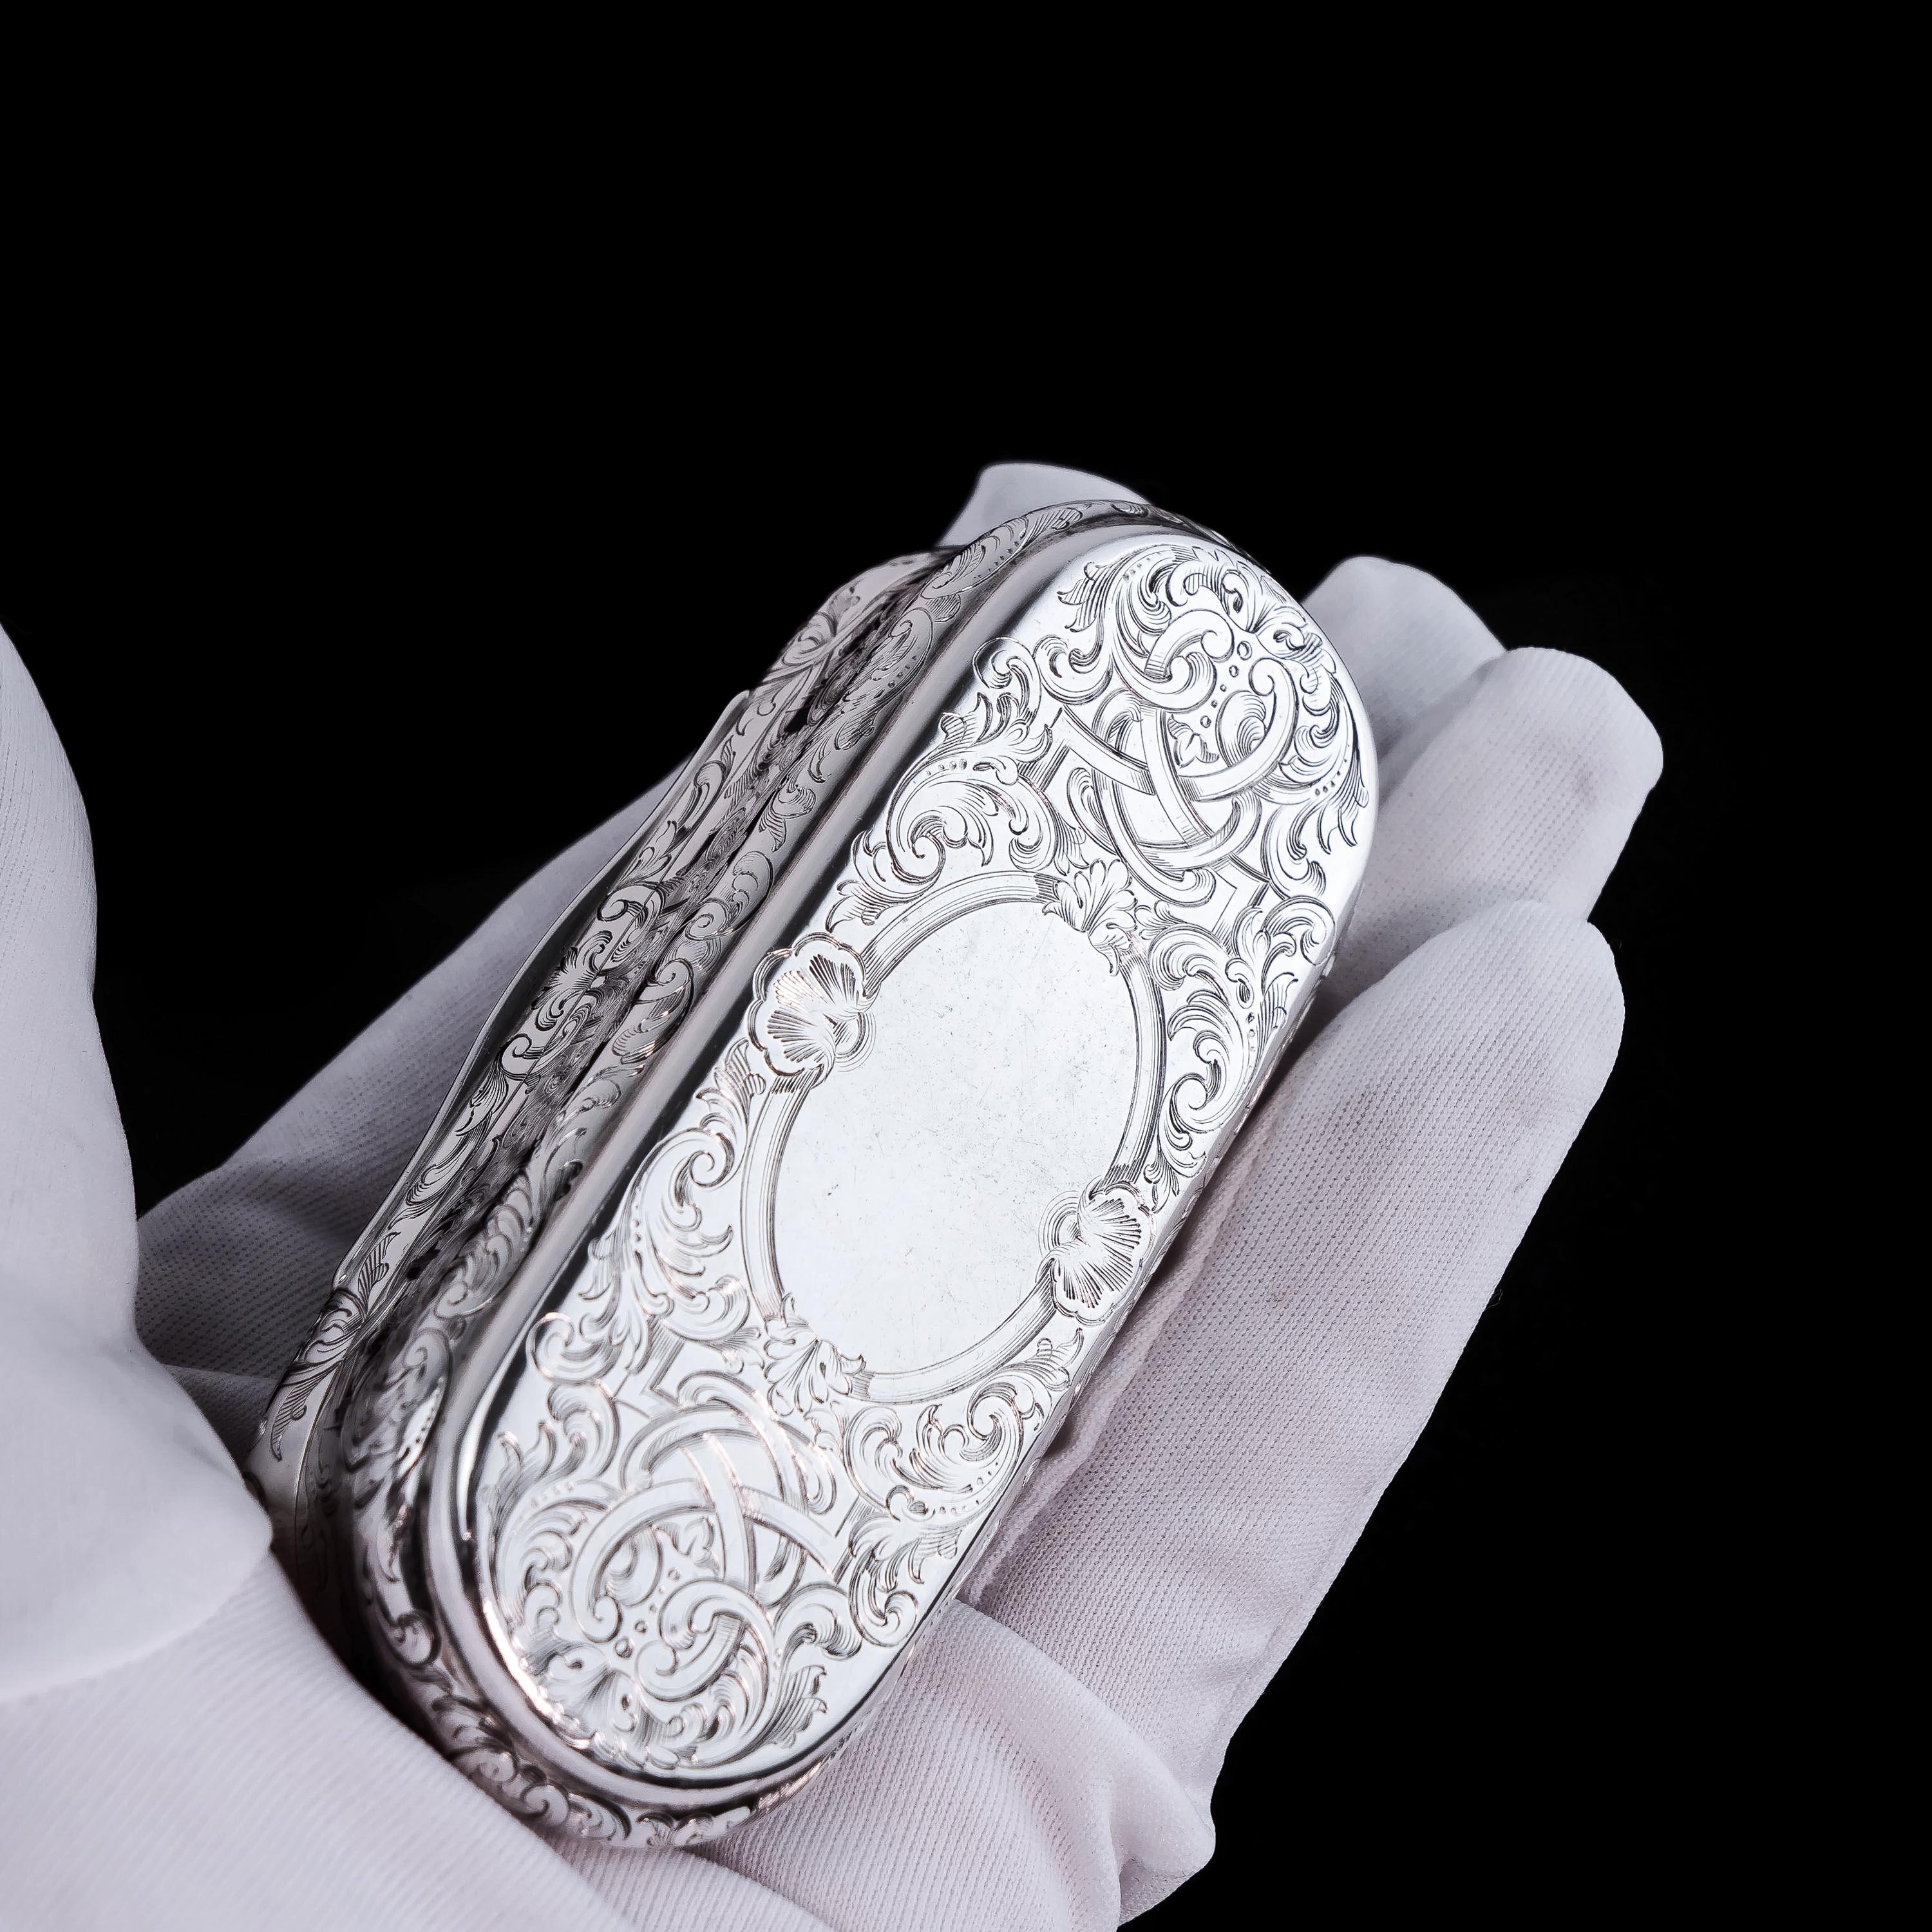 Antique Silver Snuff Box Oblong Shape - Charles Rawlings & William Summers 1849 For Sale 7